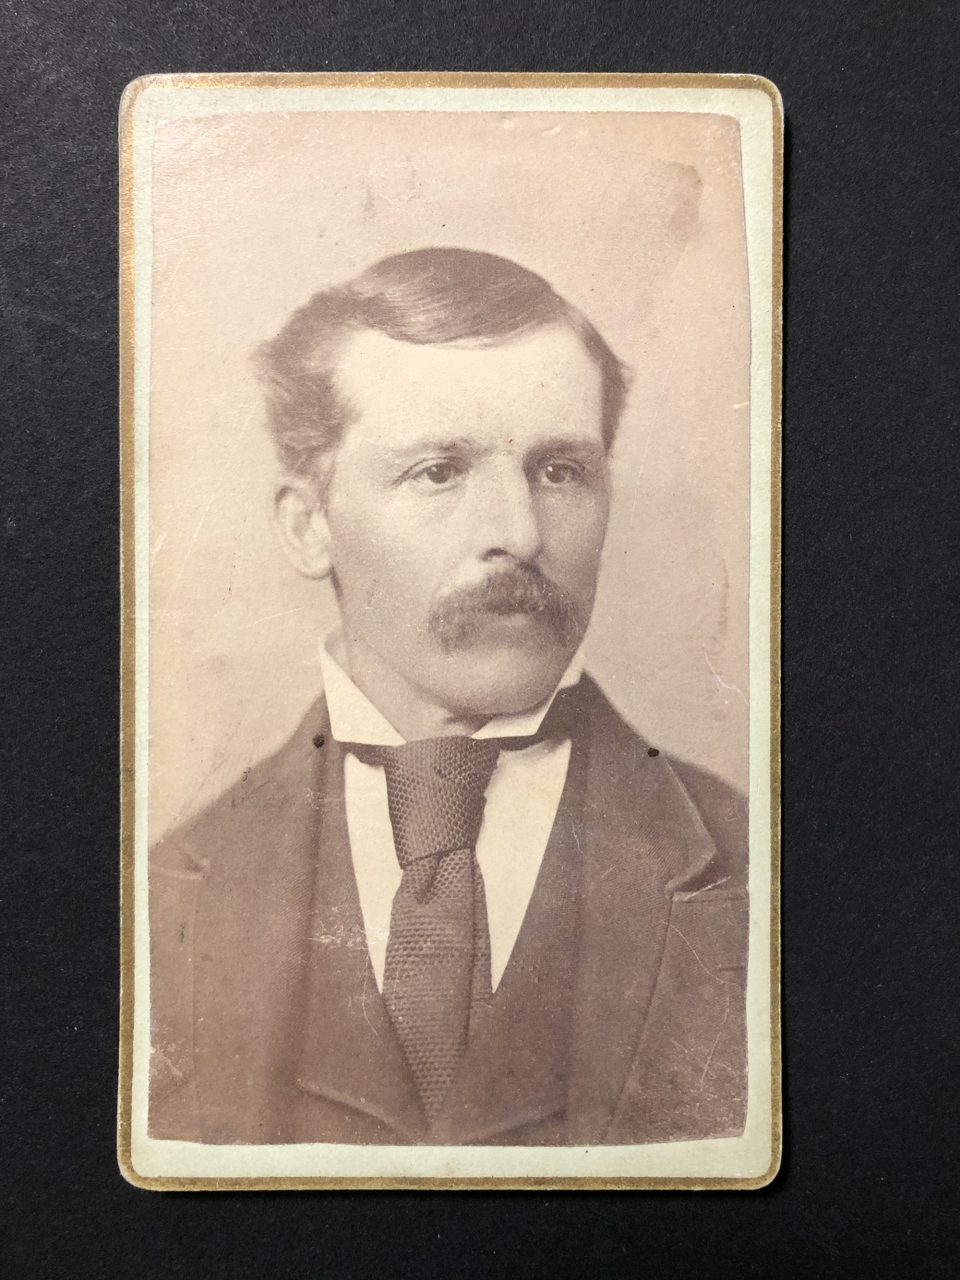 Head and shoulders portrait of a man with a mustache and necktie with a very wide knot, made by photographer A.A. Scott of Hastings, Minnesota.